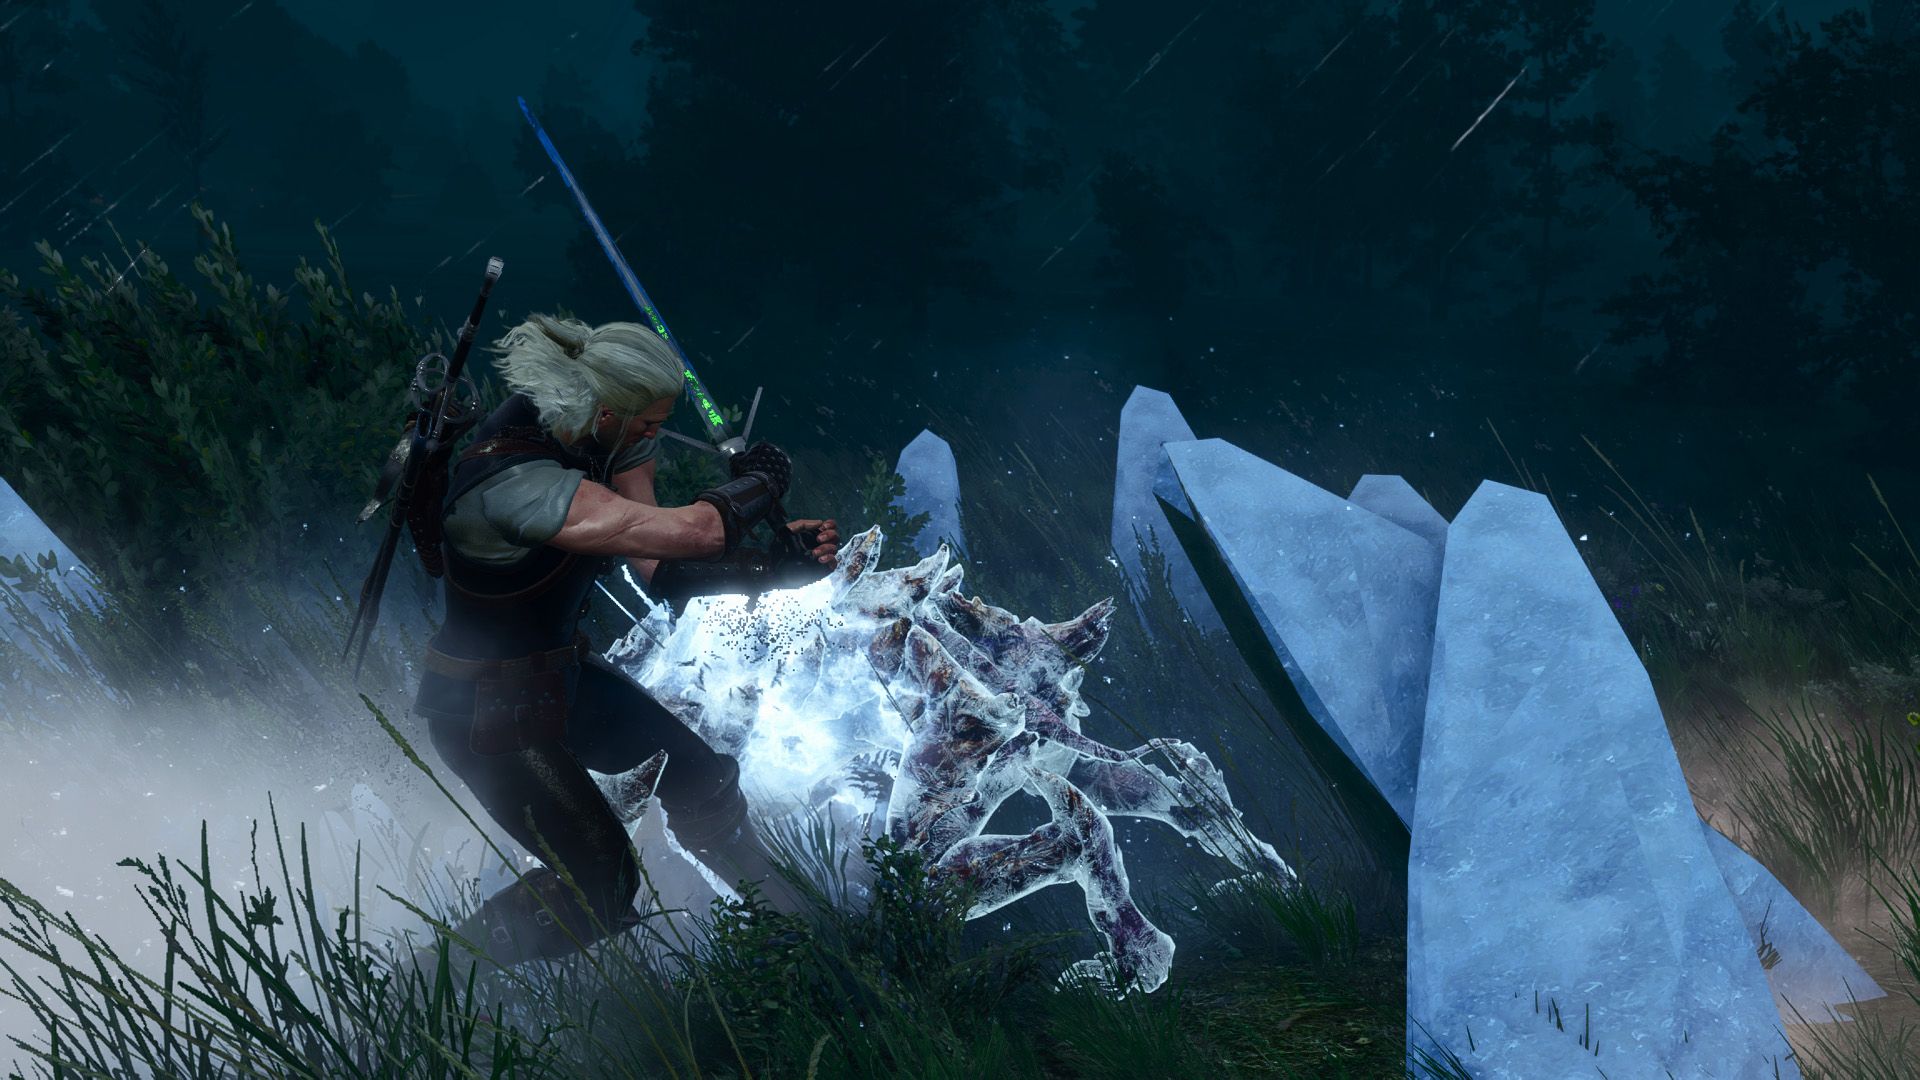 A screenshot of Geralt fending off an icy attack from a monster in a field at night.